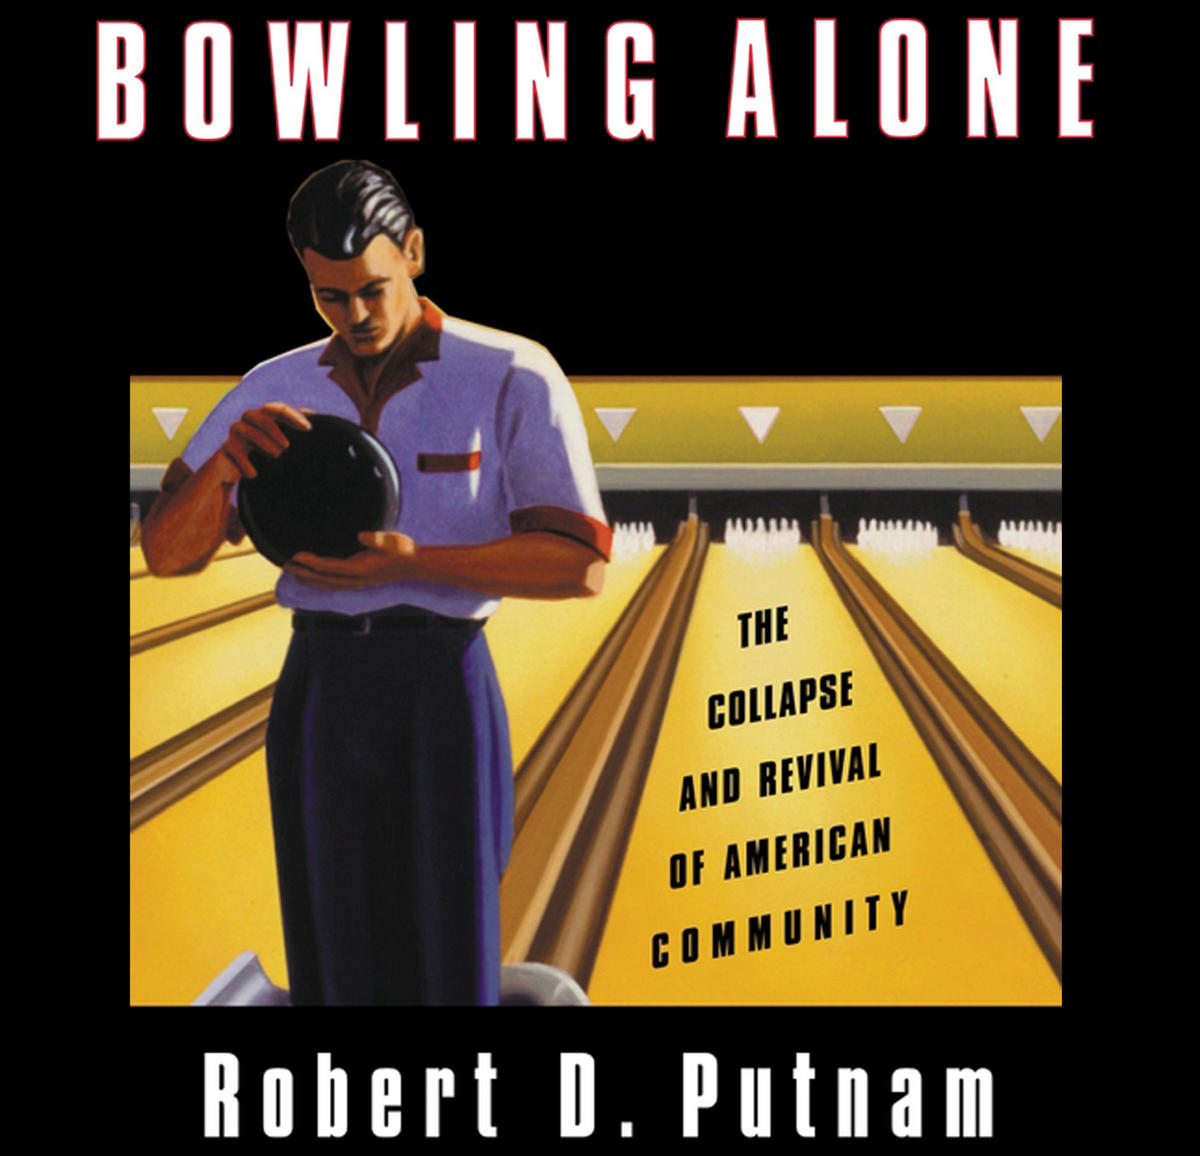 Book Review: “Bowling Alone” by Putnam | by Faiaz | The Curious Commentator  | Medium